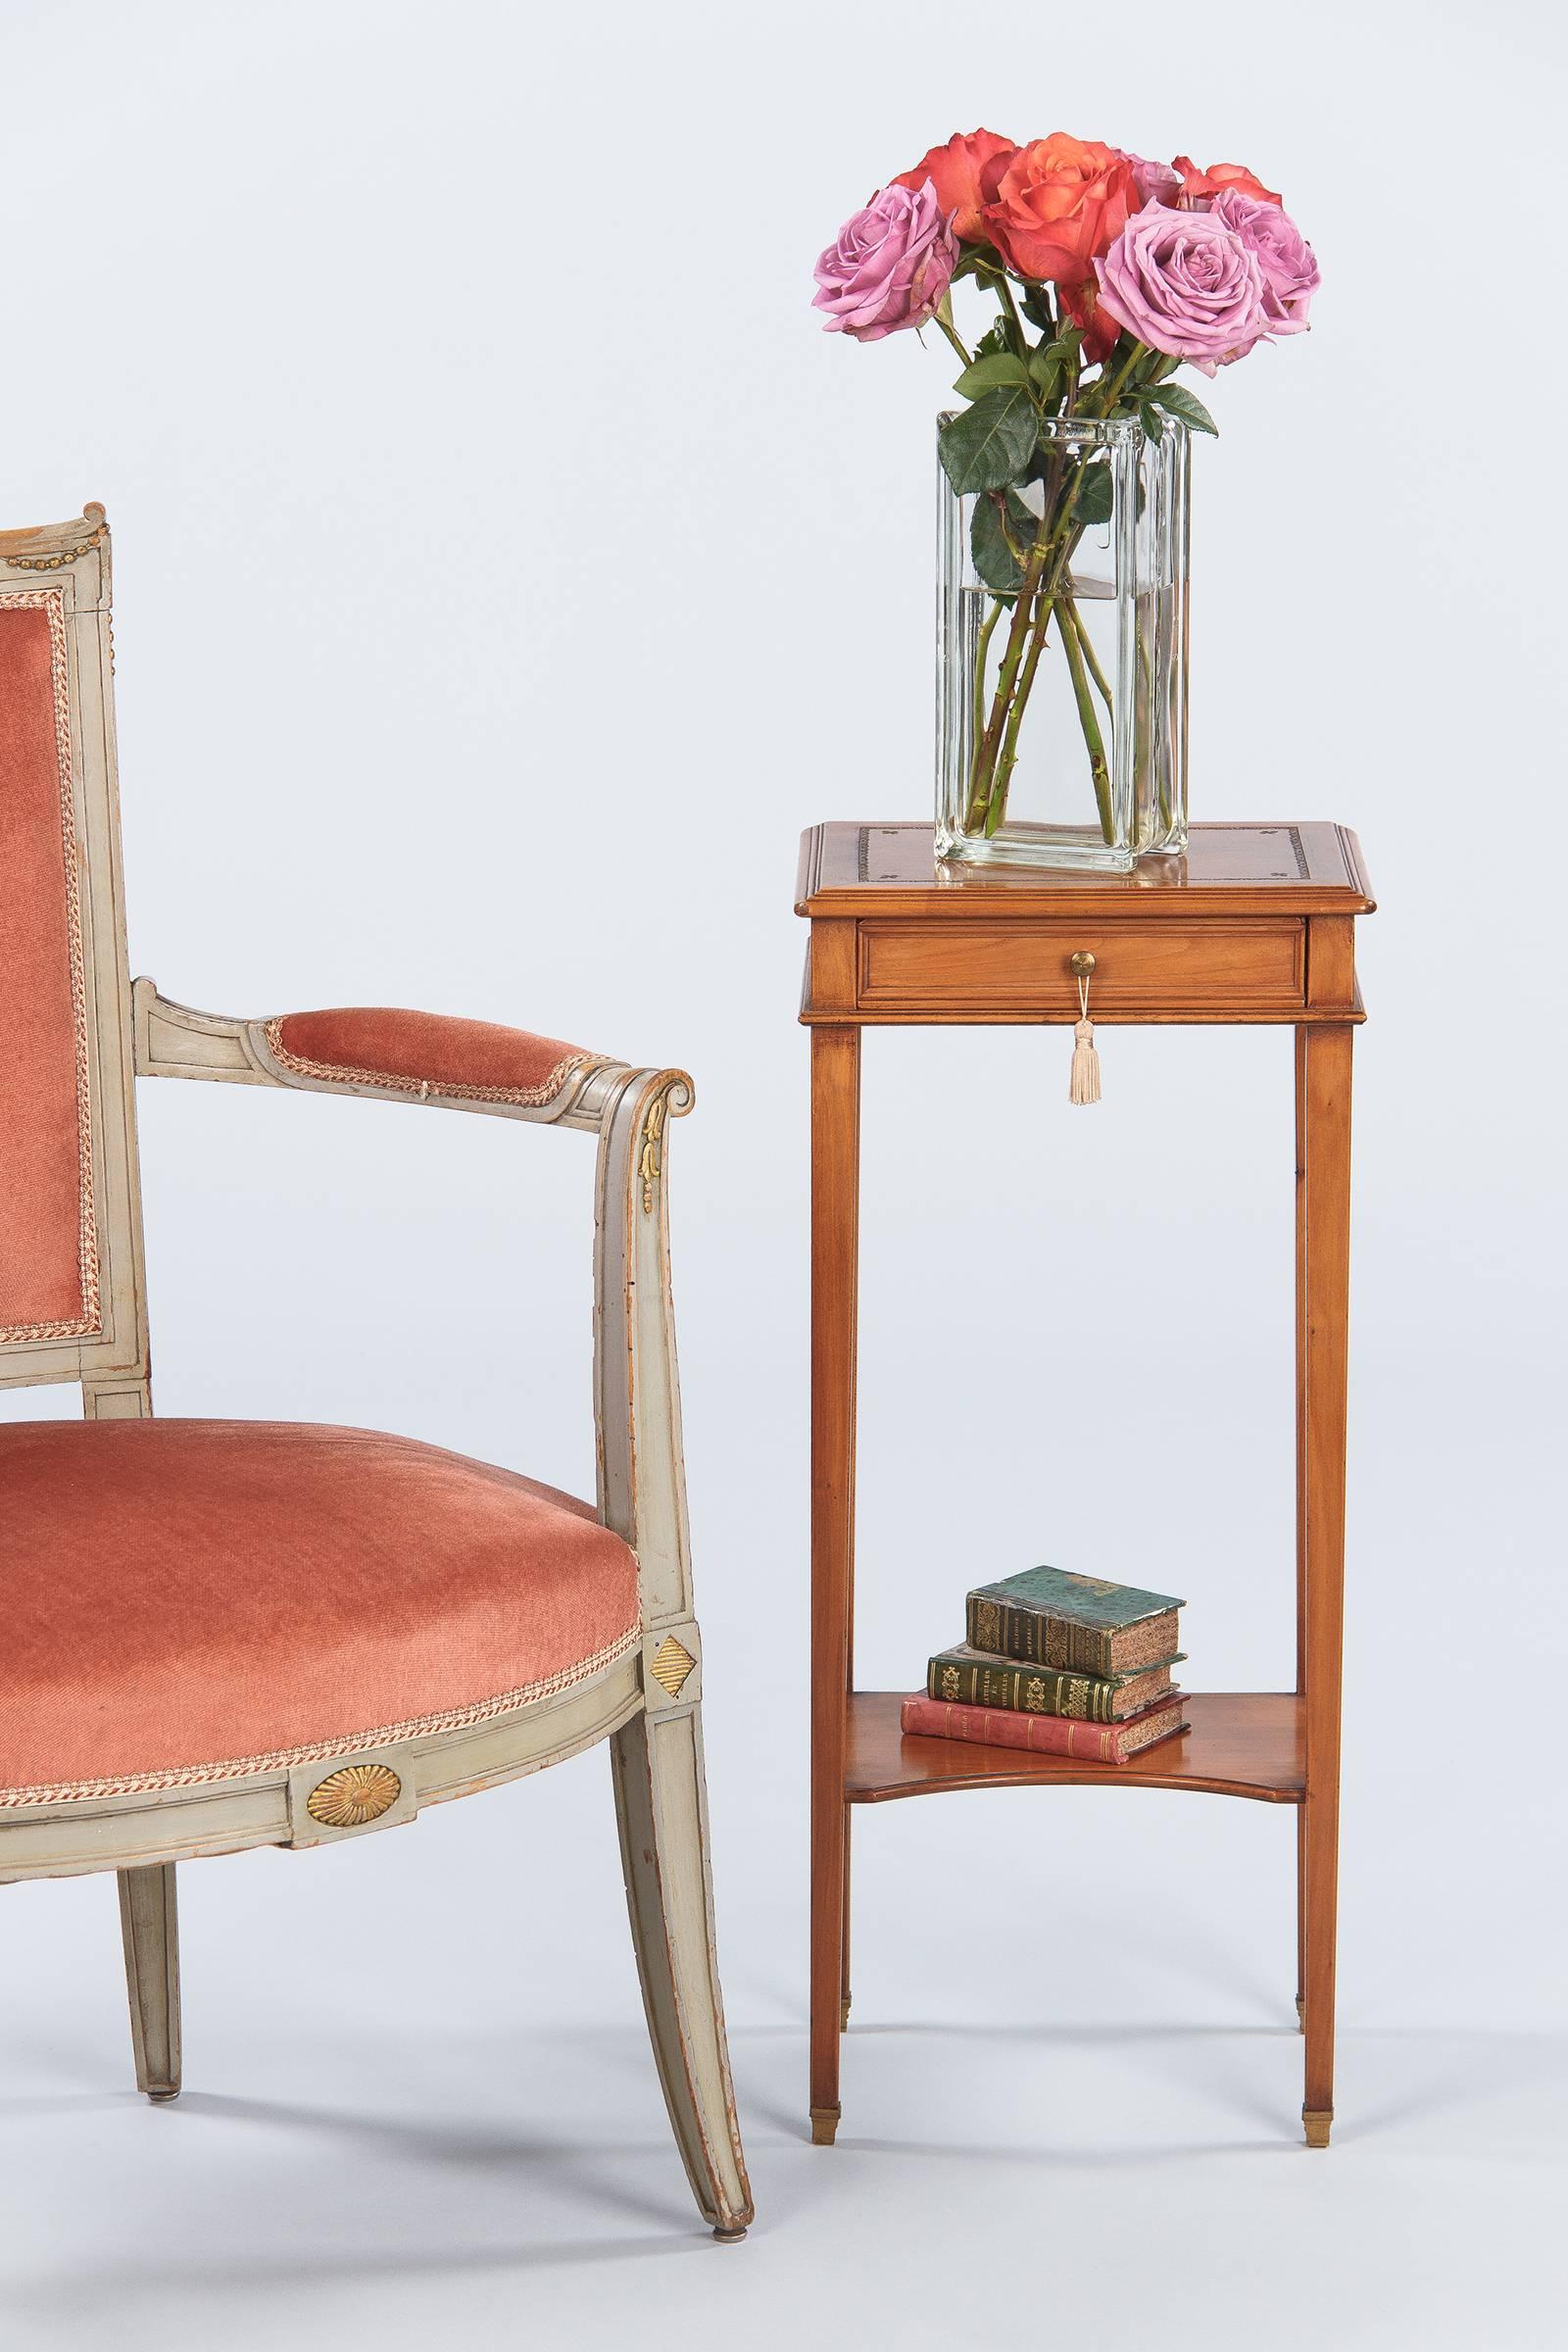 A charming small side table made of cherrywood in the Louis XVI style with an embossed tobacco leather top. The 12